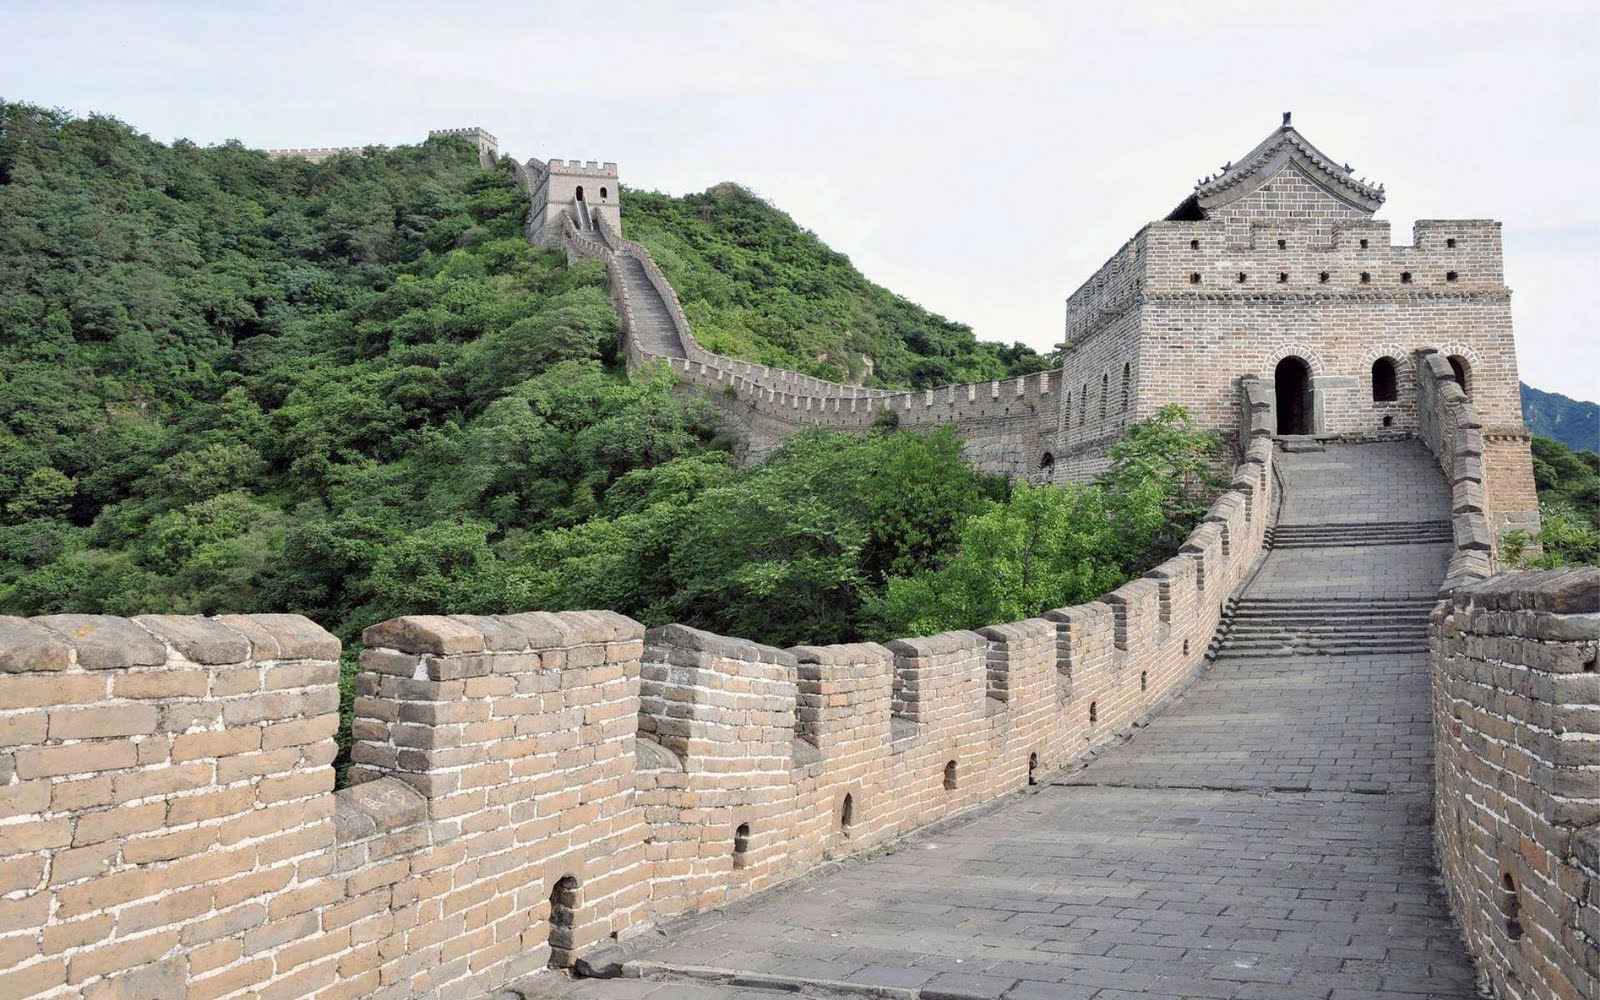 Great Wall Of China Wallpaper High Quality